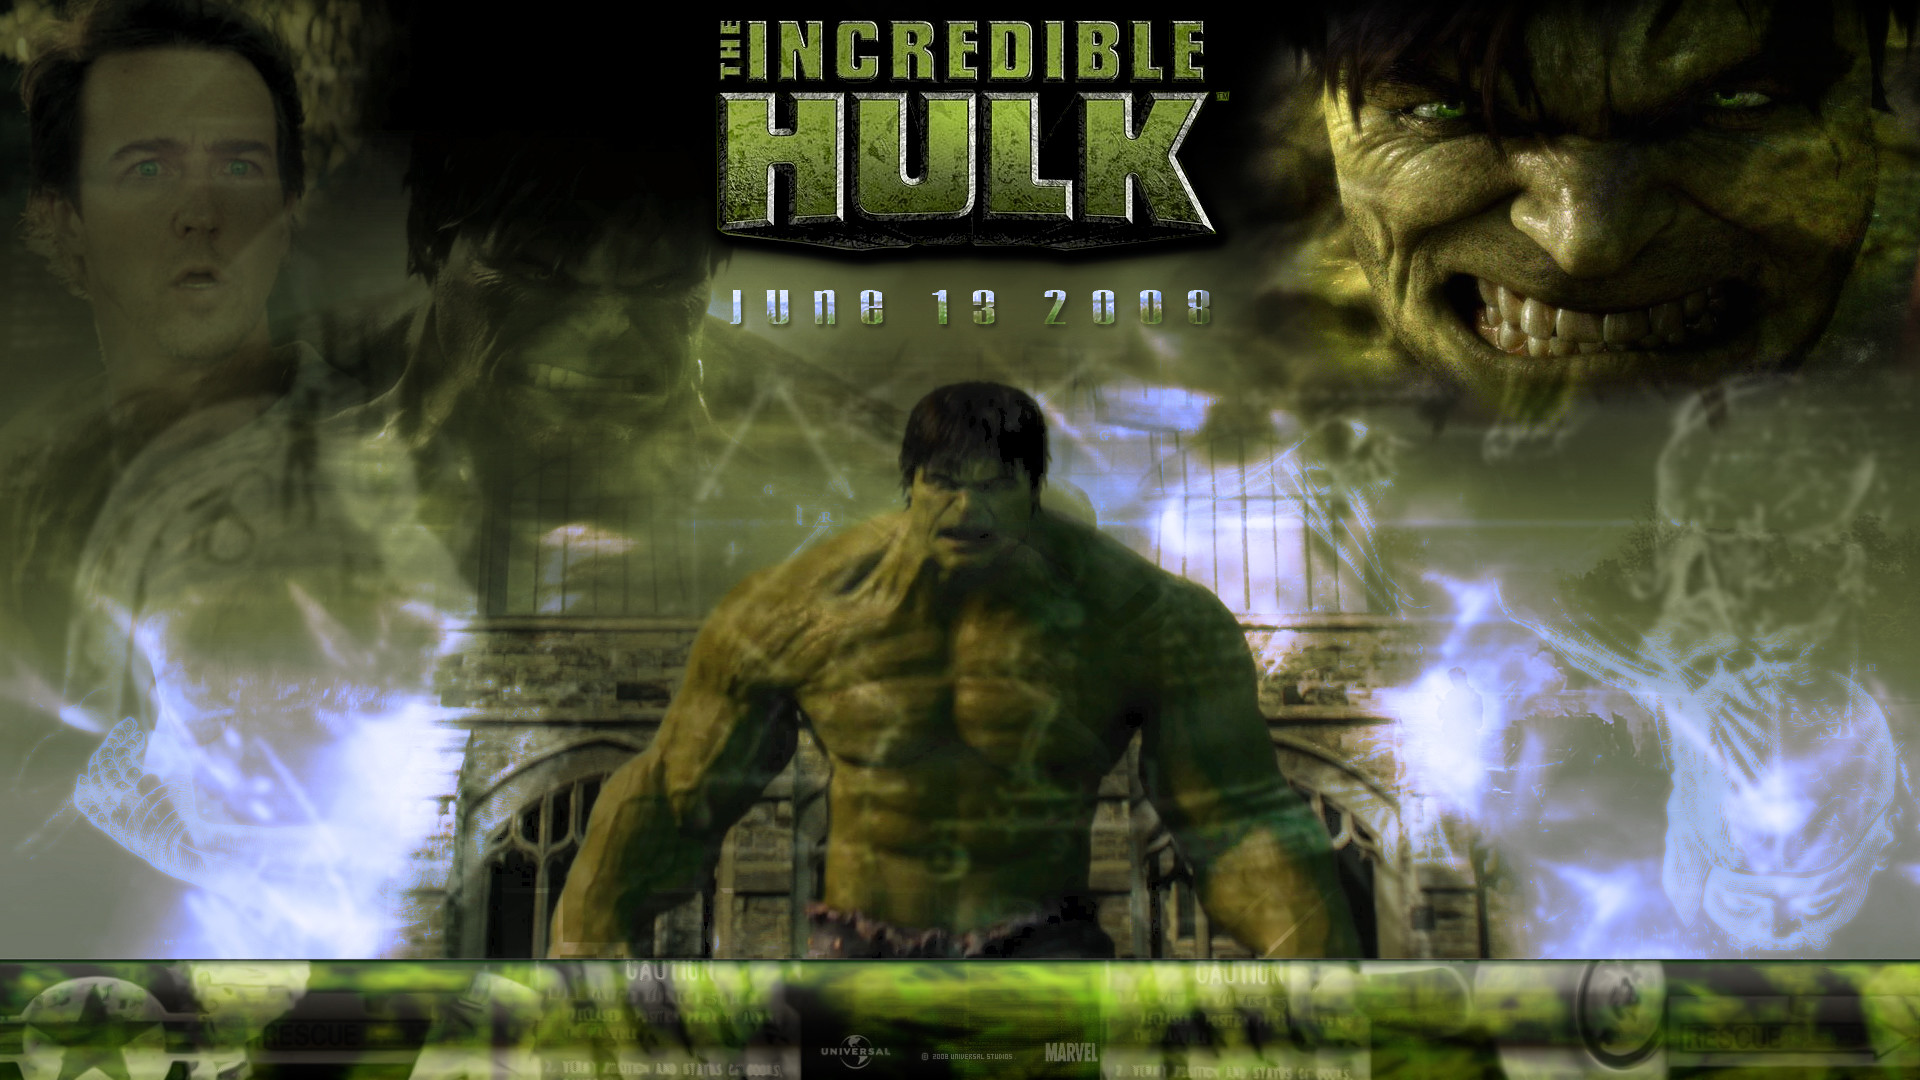 1920x1080 The Official Incredible Hulk Fan Art and Manips Thread - Page 24 - The  SuperHeroHype Forums